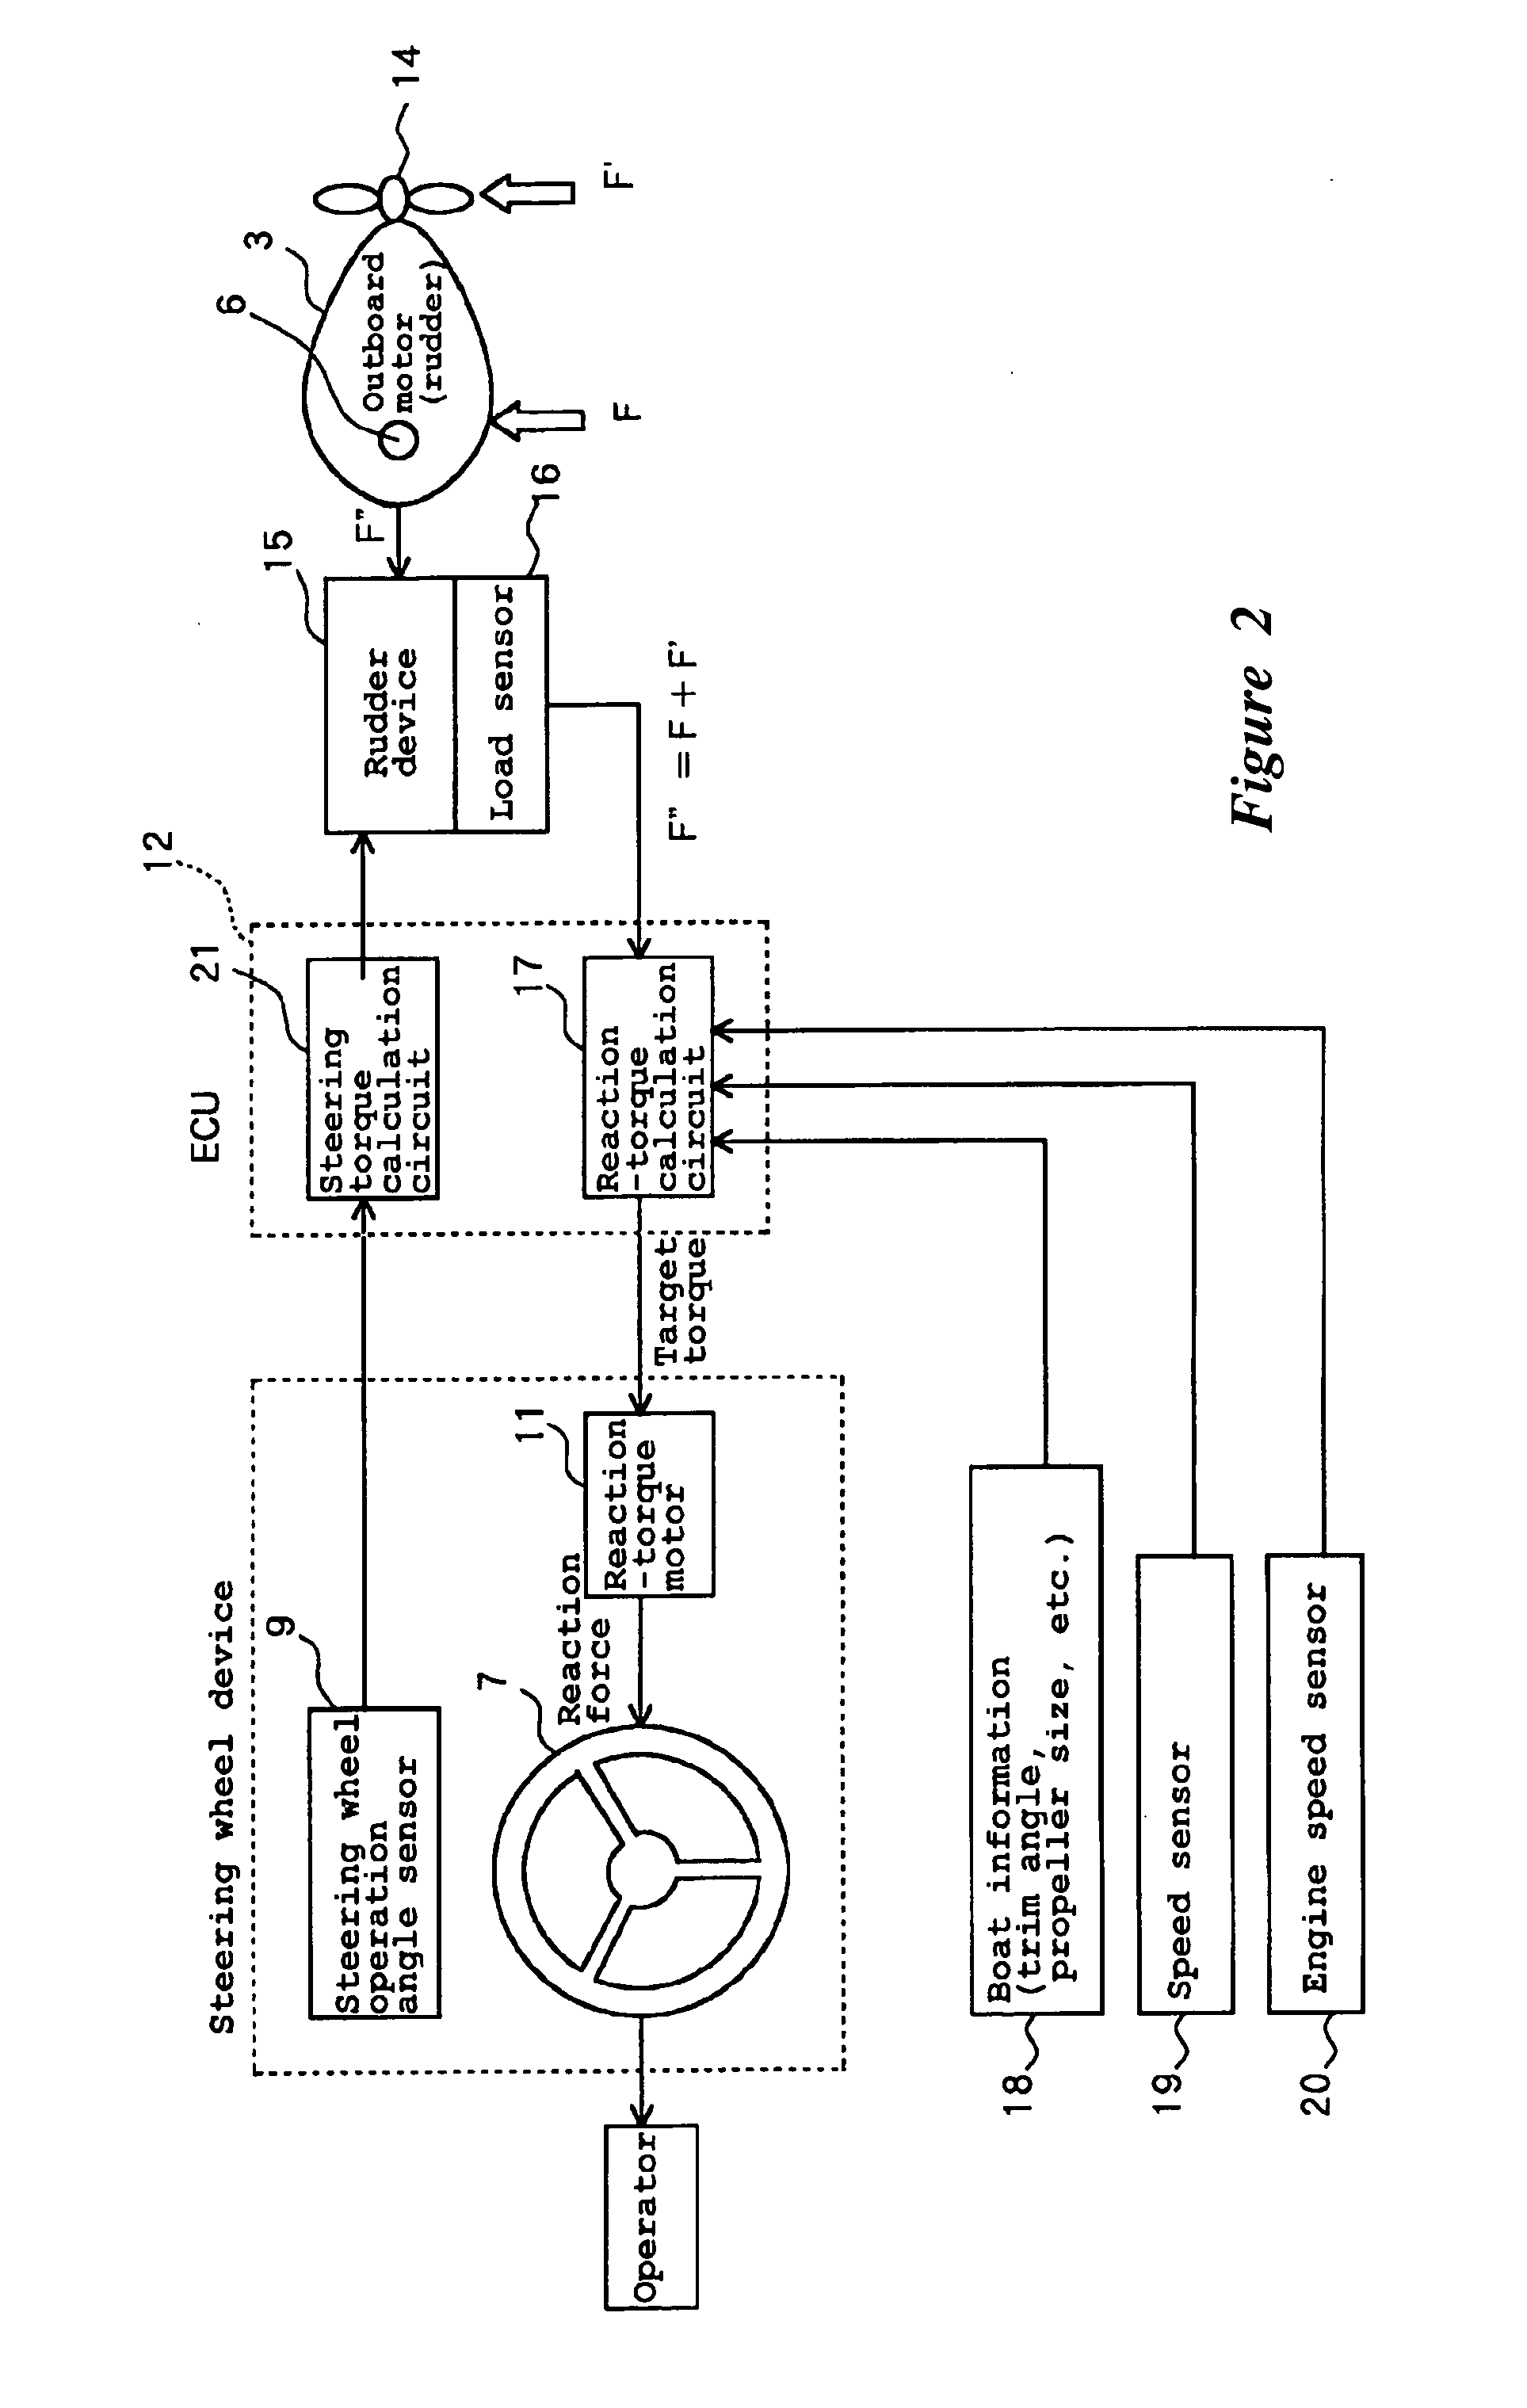 Electric steering apparatus for watercraft